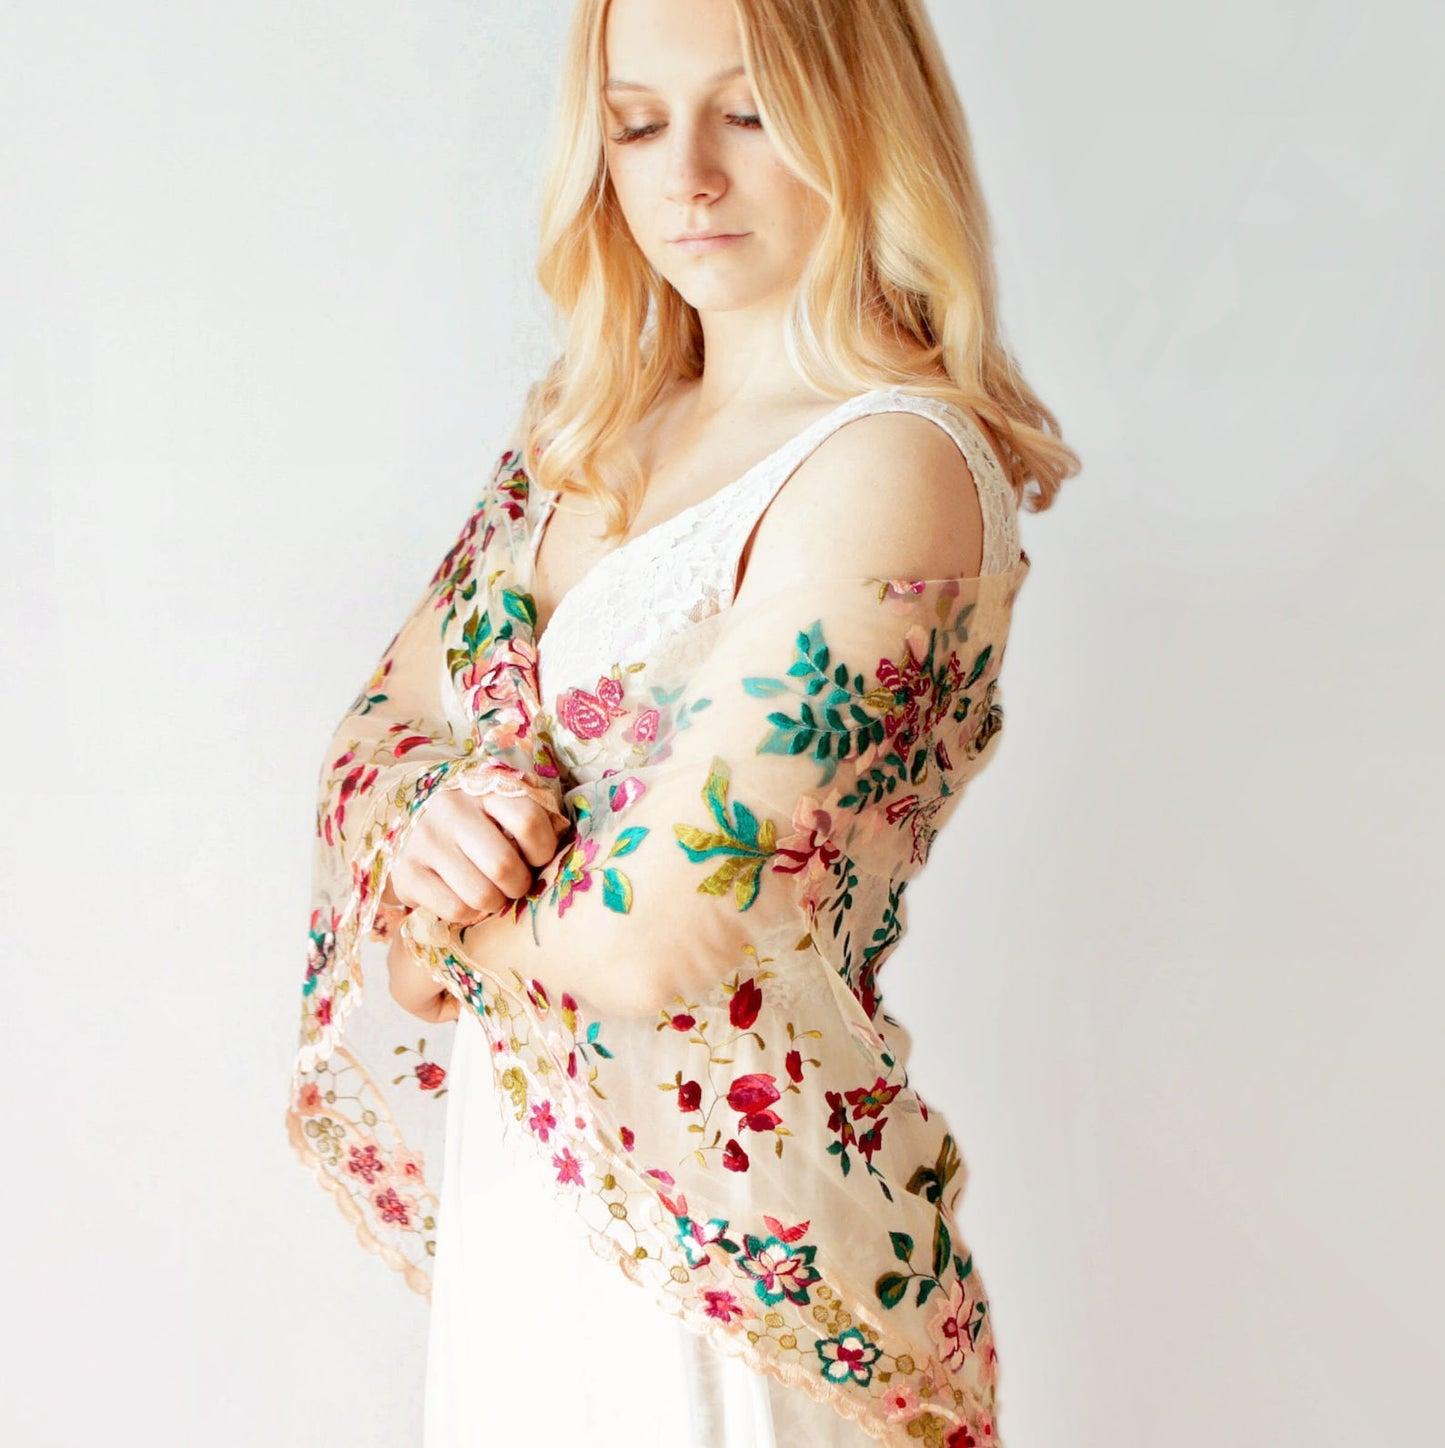 Garden rose floral embroidered shawl wrap